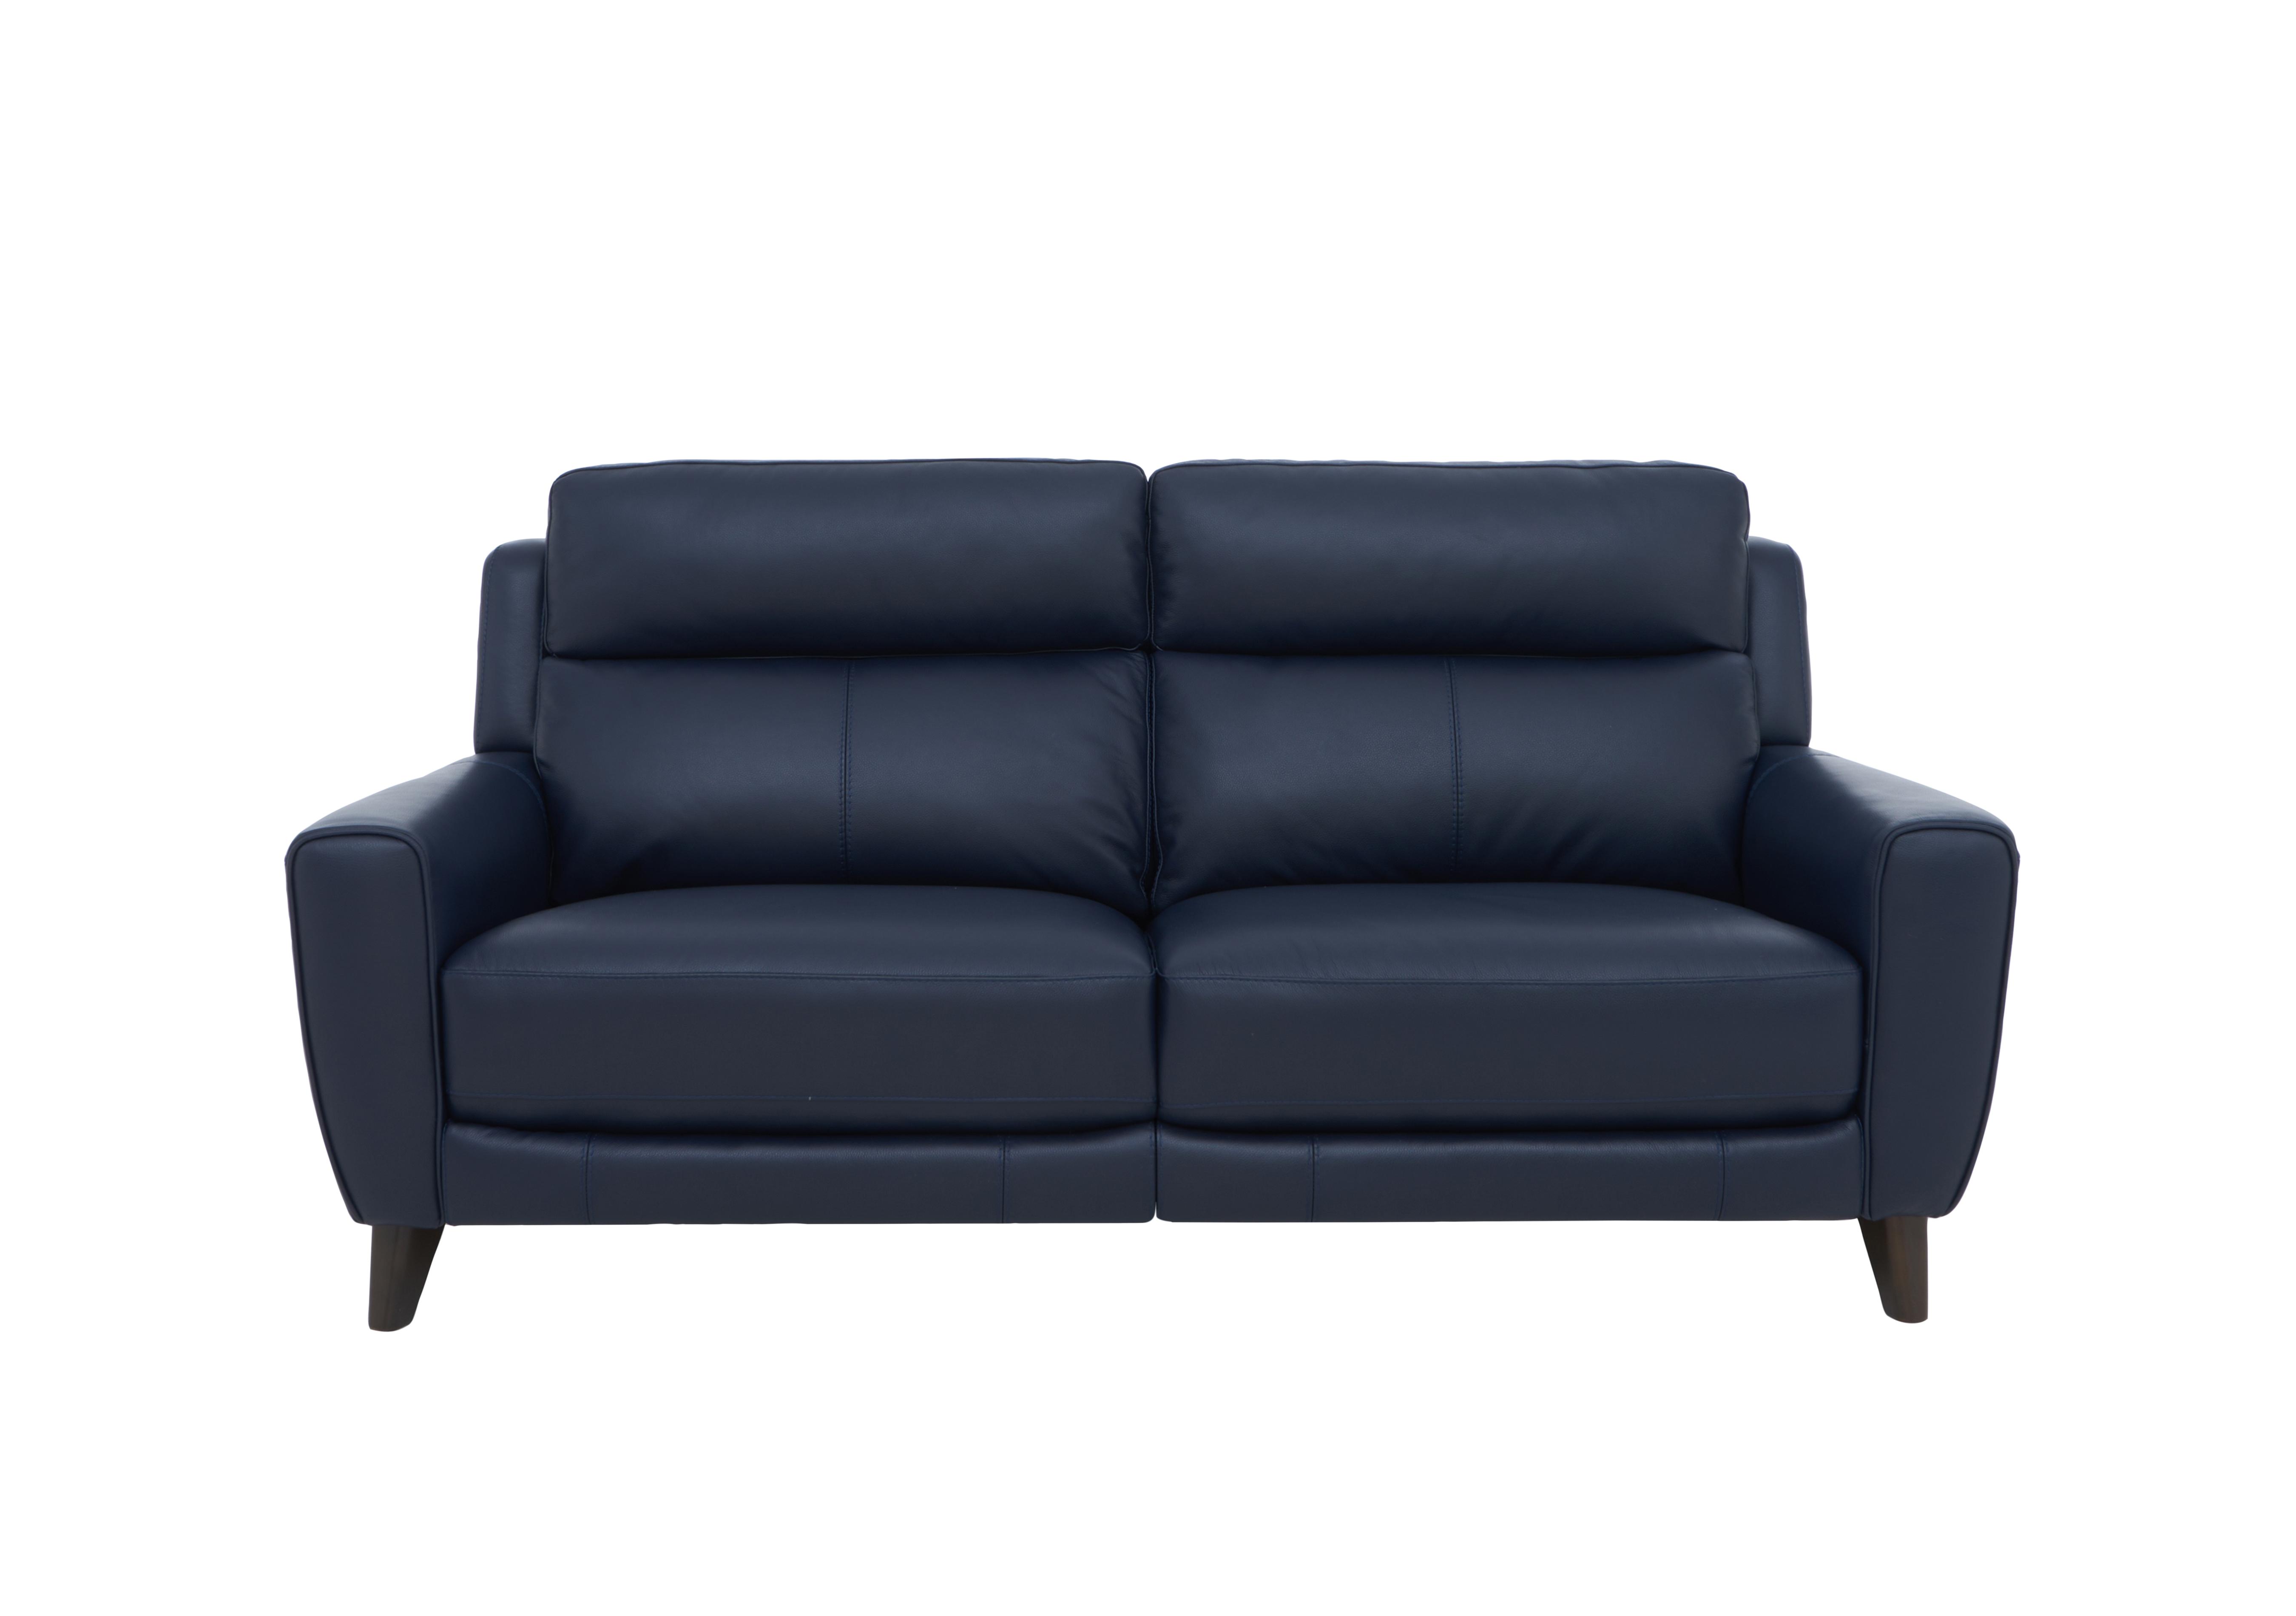 Zen 3 Seater Leather Power Recliner Sofa with Power Headrests and Power Lumbar in Bx-036c Navy on Furniture Village